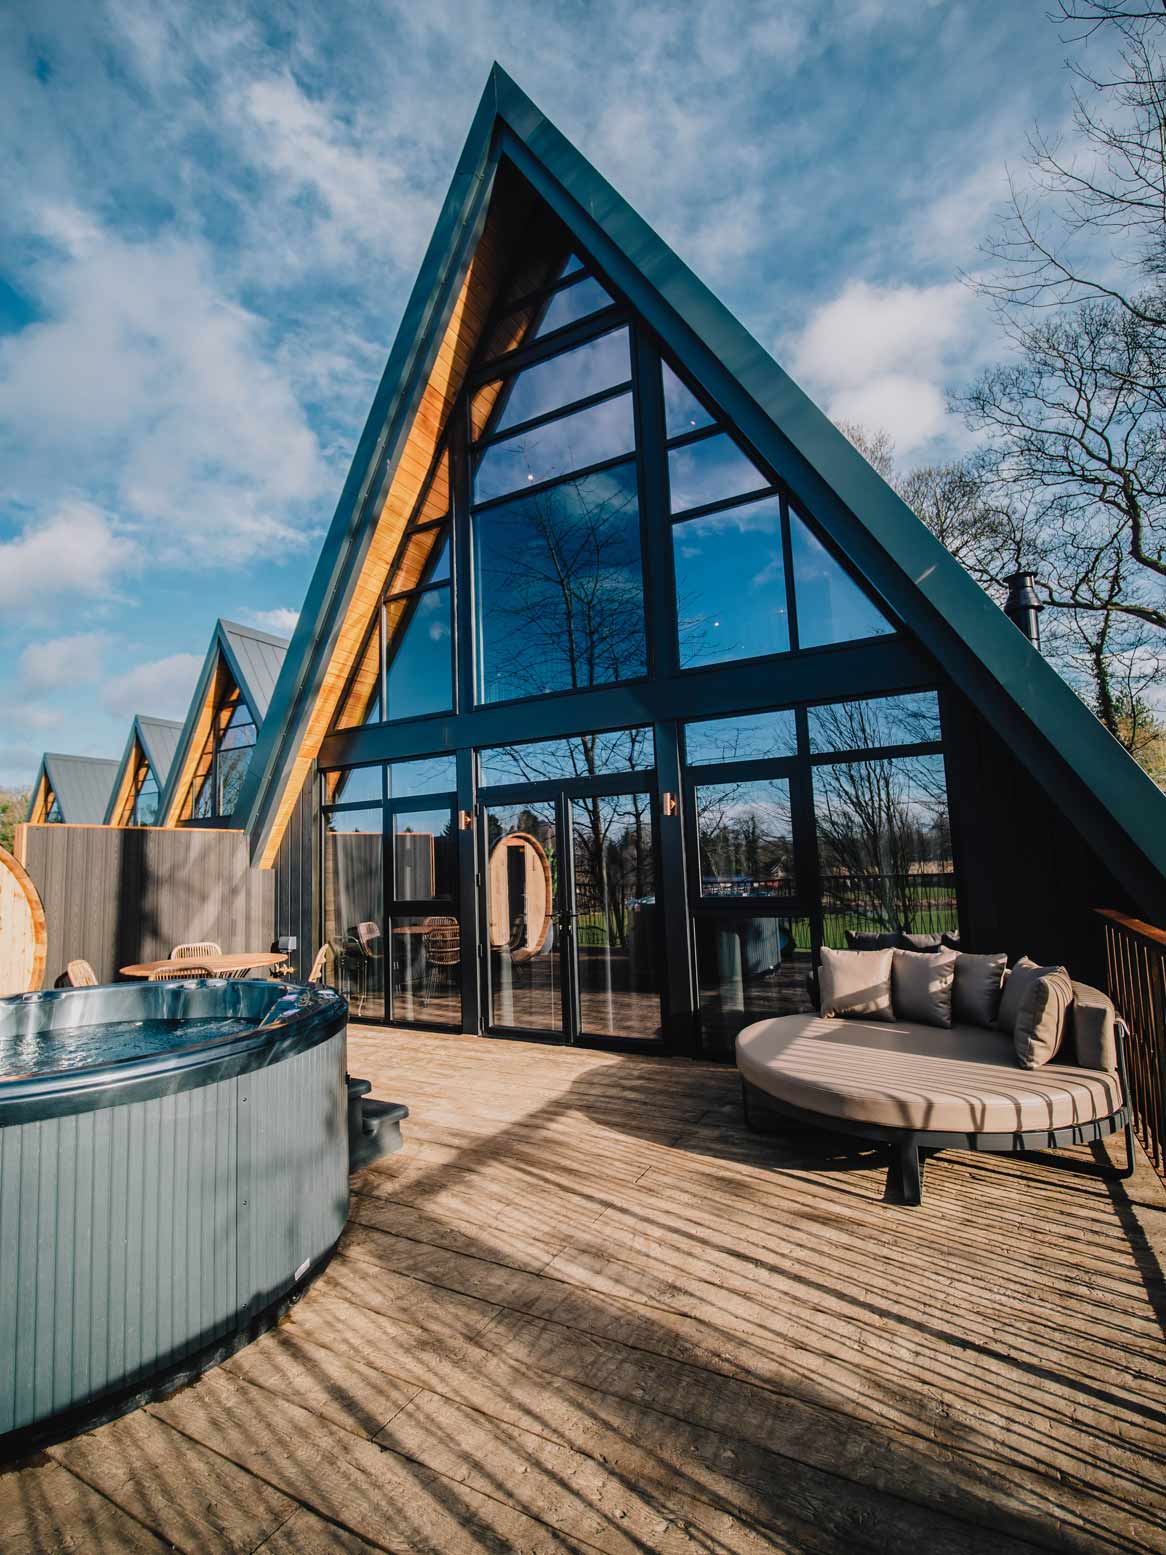 Ramside Hall Hotel Expands Popular A-Frame Treehouses with Unveiling of Swan and Kingfisher